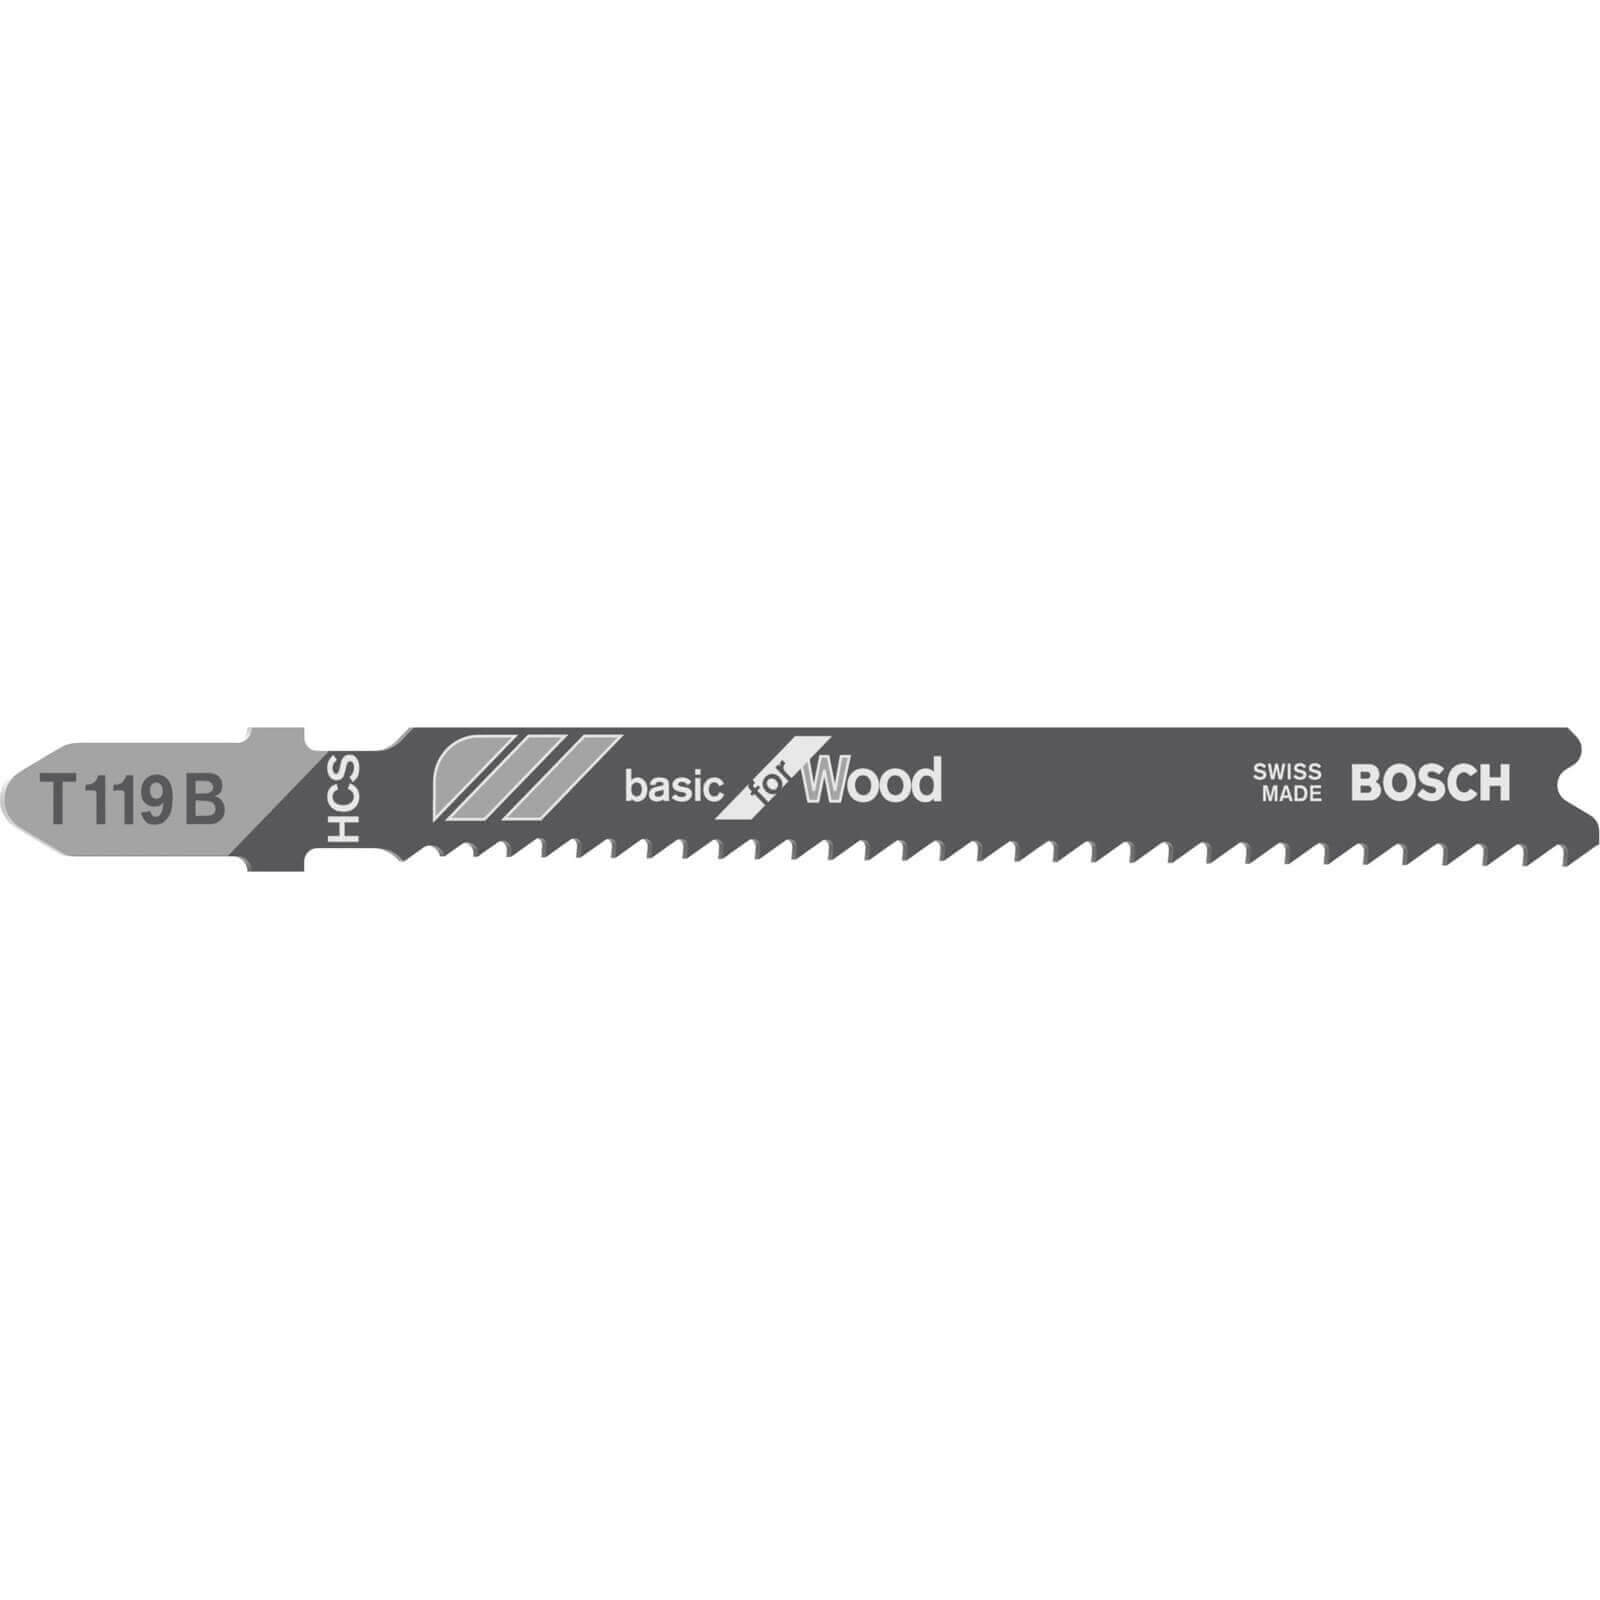 Image of Bosch T119 B Wood Cutting Jigsaw Blades Pack of 3